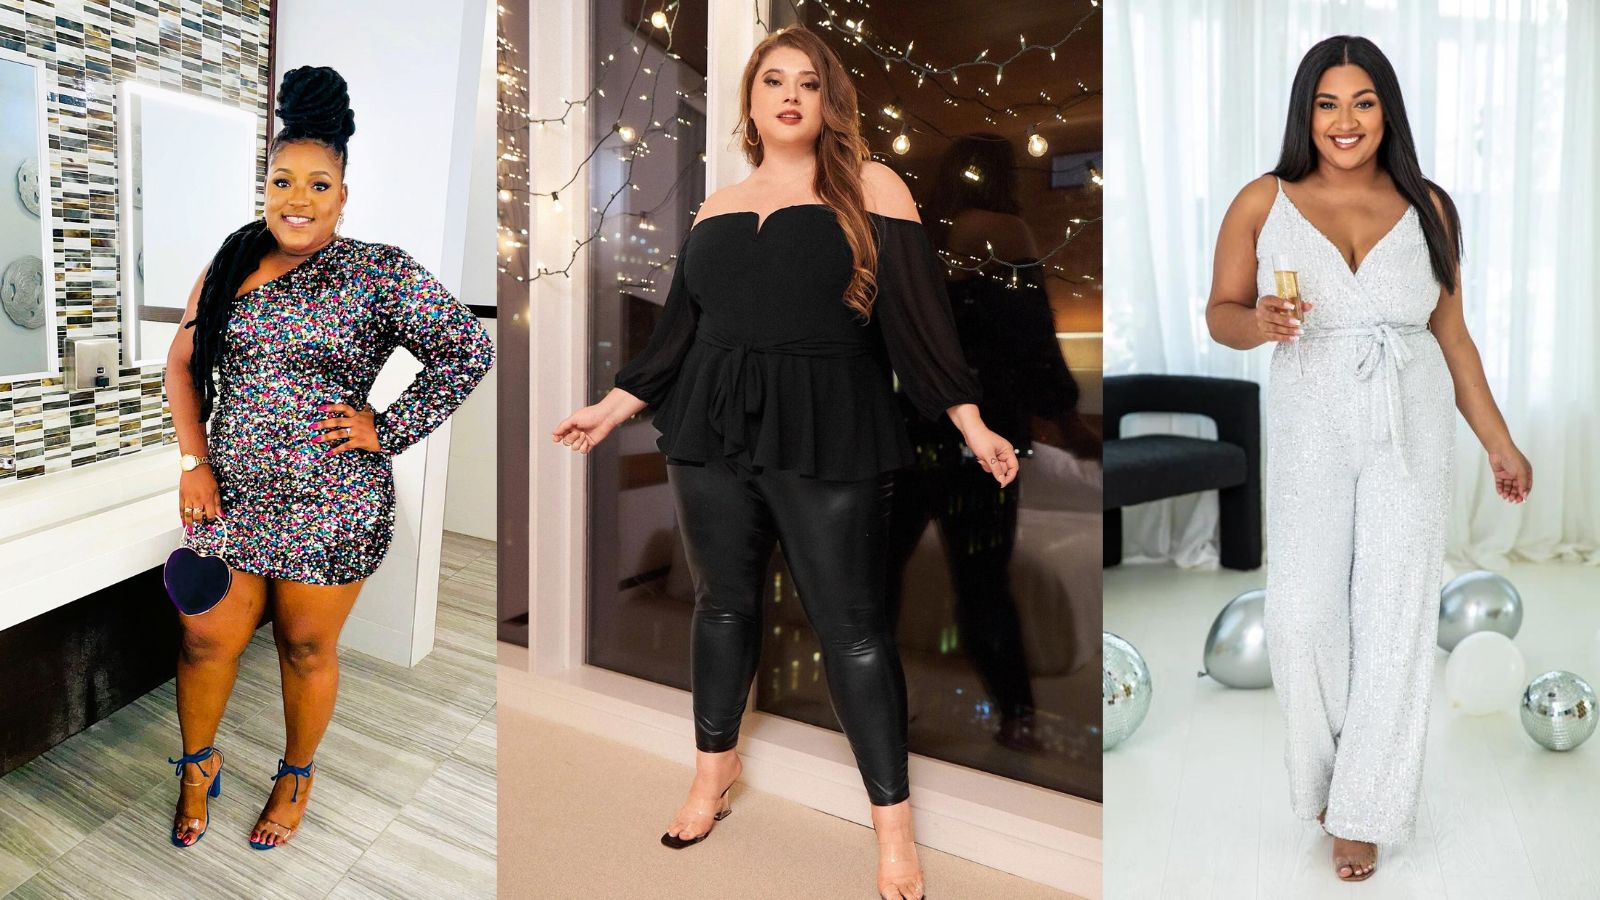 plus size New Year's Eve outfits and plus size NYE dresses